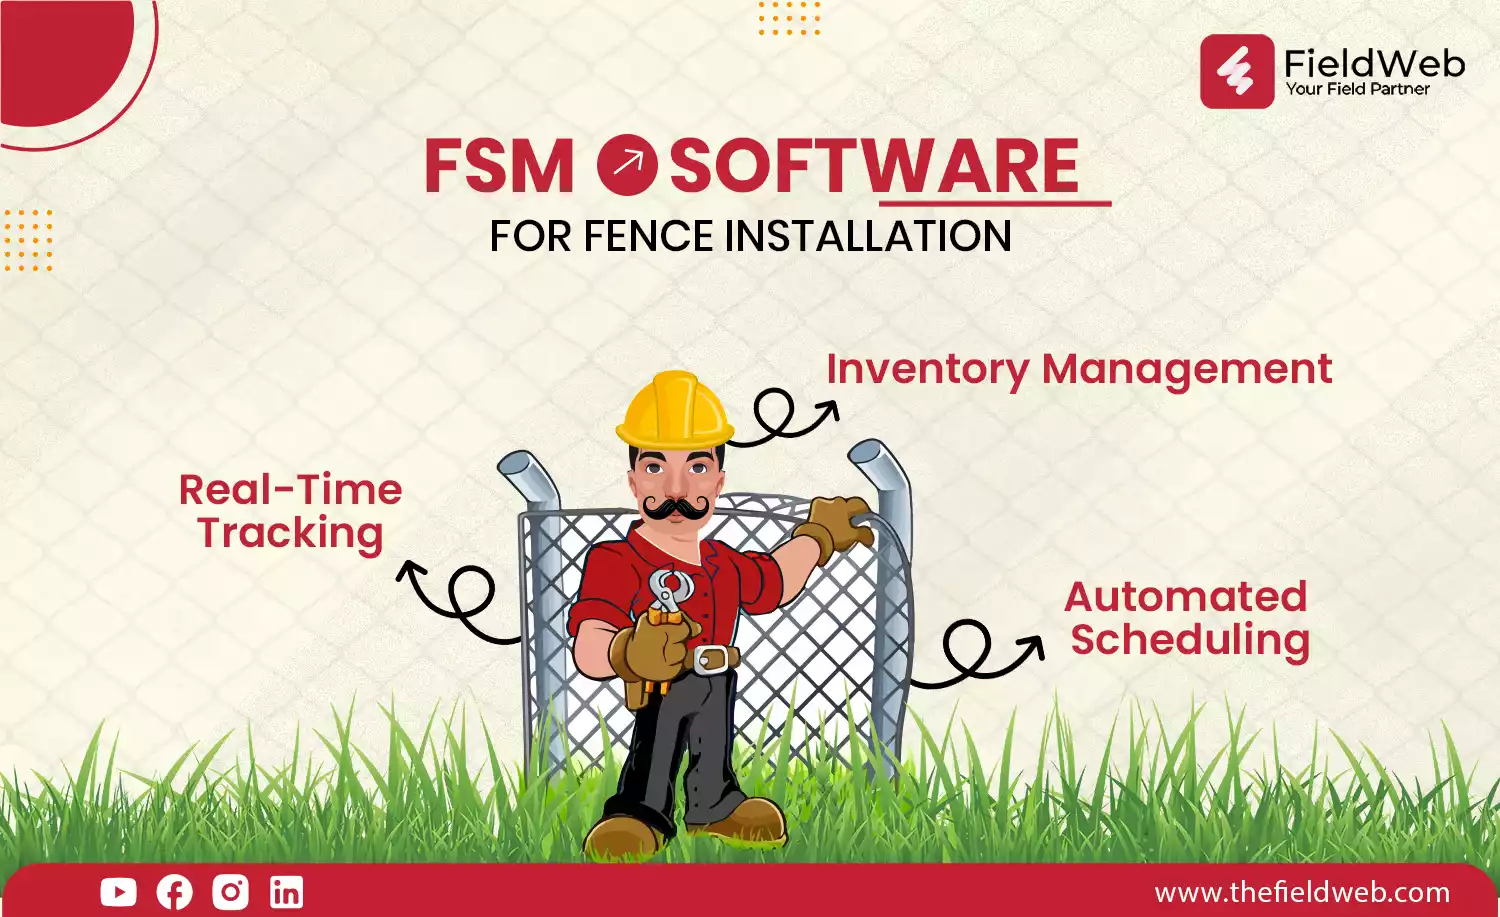 fieldweb mascot stand in grass with fence showing the the fsm software for fence installation